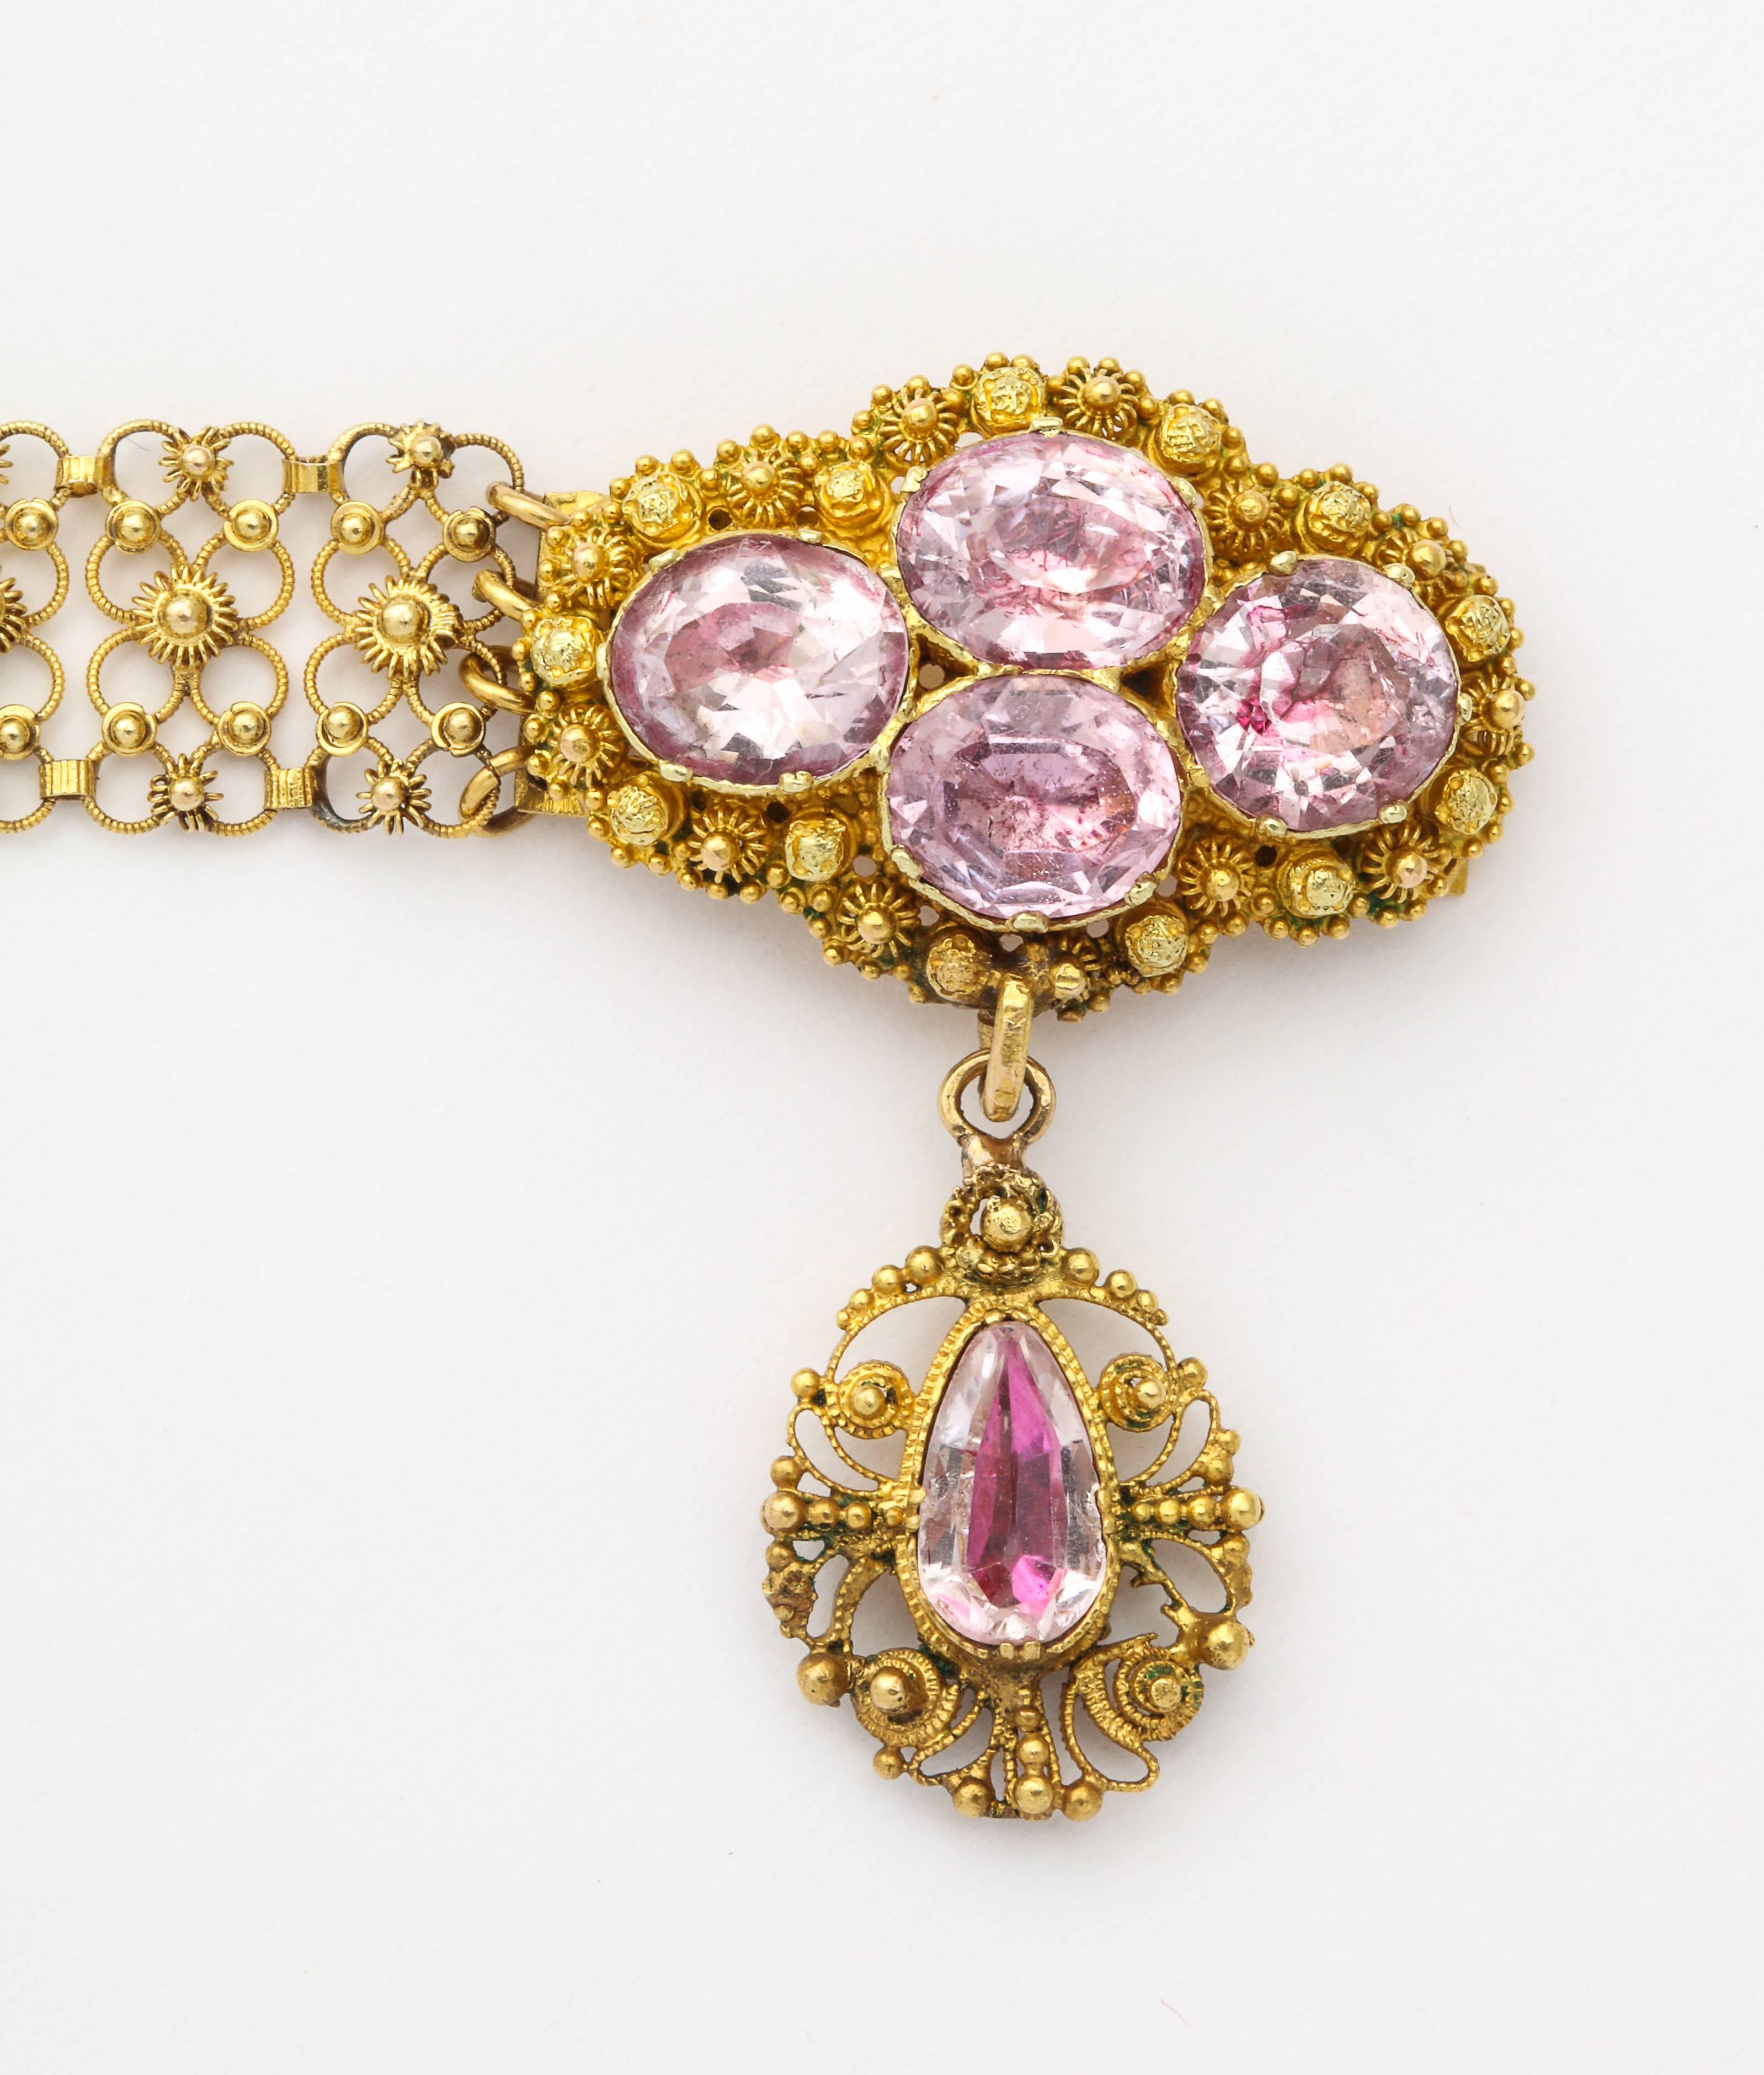 A lace like and perfect, flexible bracelet c.1830 is clasped by a plaque set with four oval pink topaz gems. Suspended is an oval of lace holding a teardrop of pink topaz. Total weight of the stones is 6 cts. All gems are closed back and foiled as